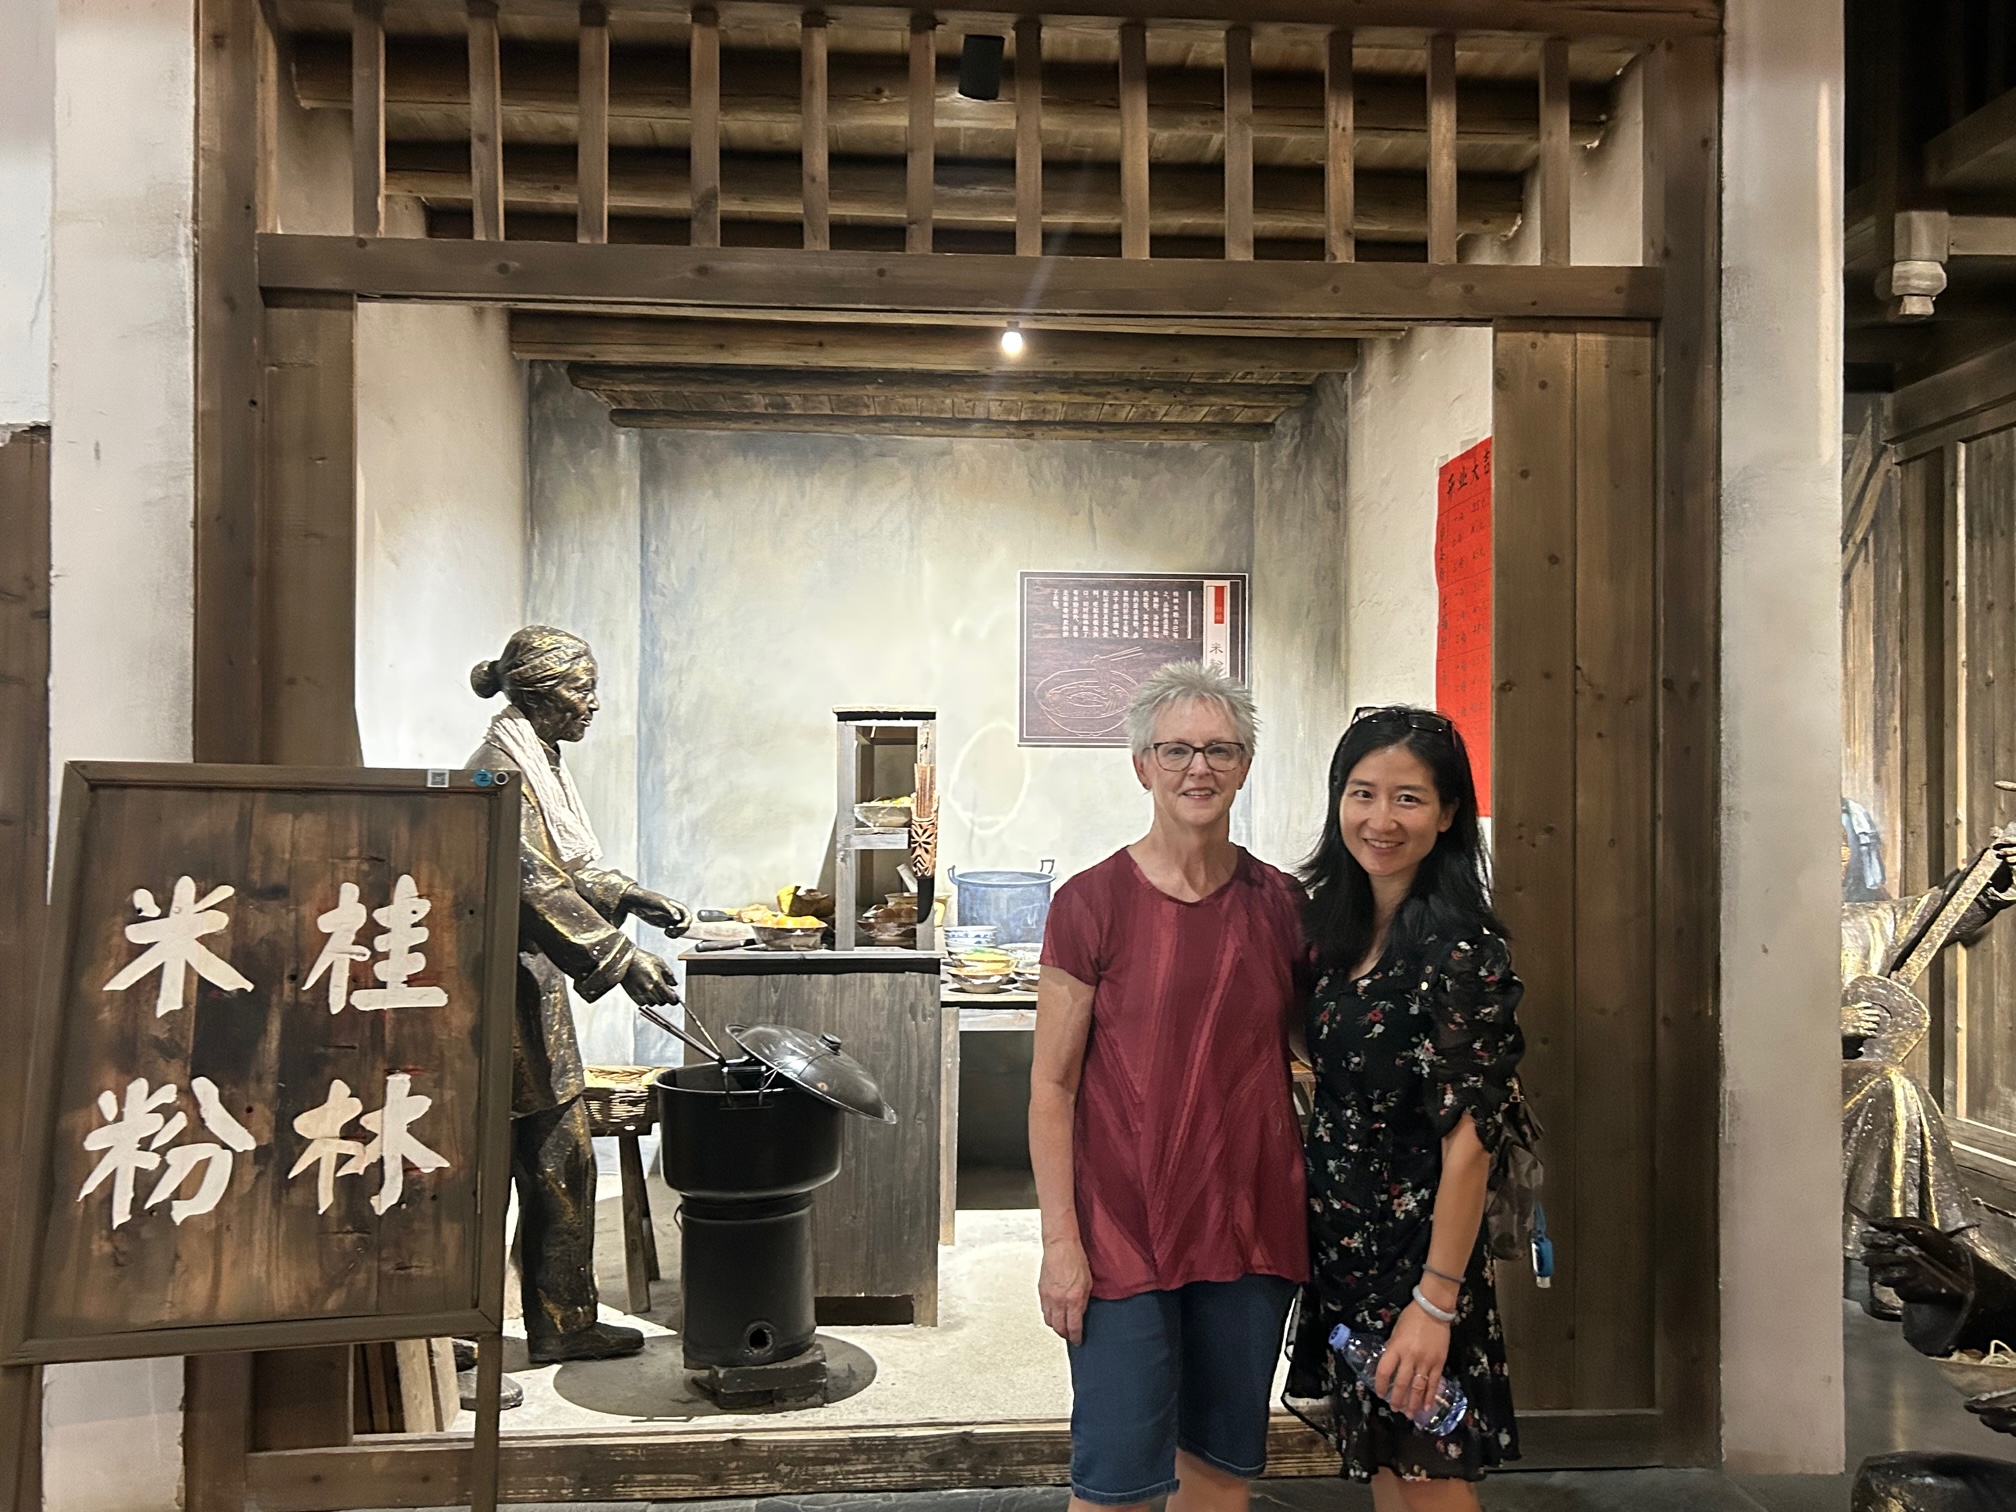 At the Guilin Museum with my teacher